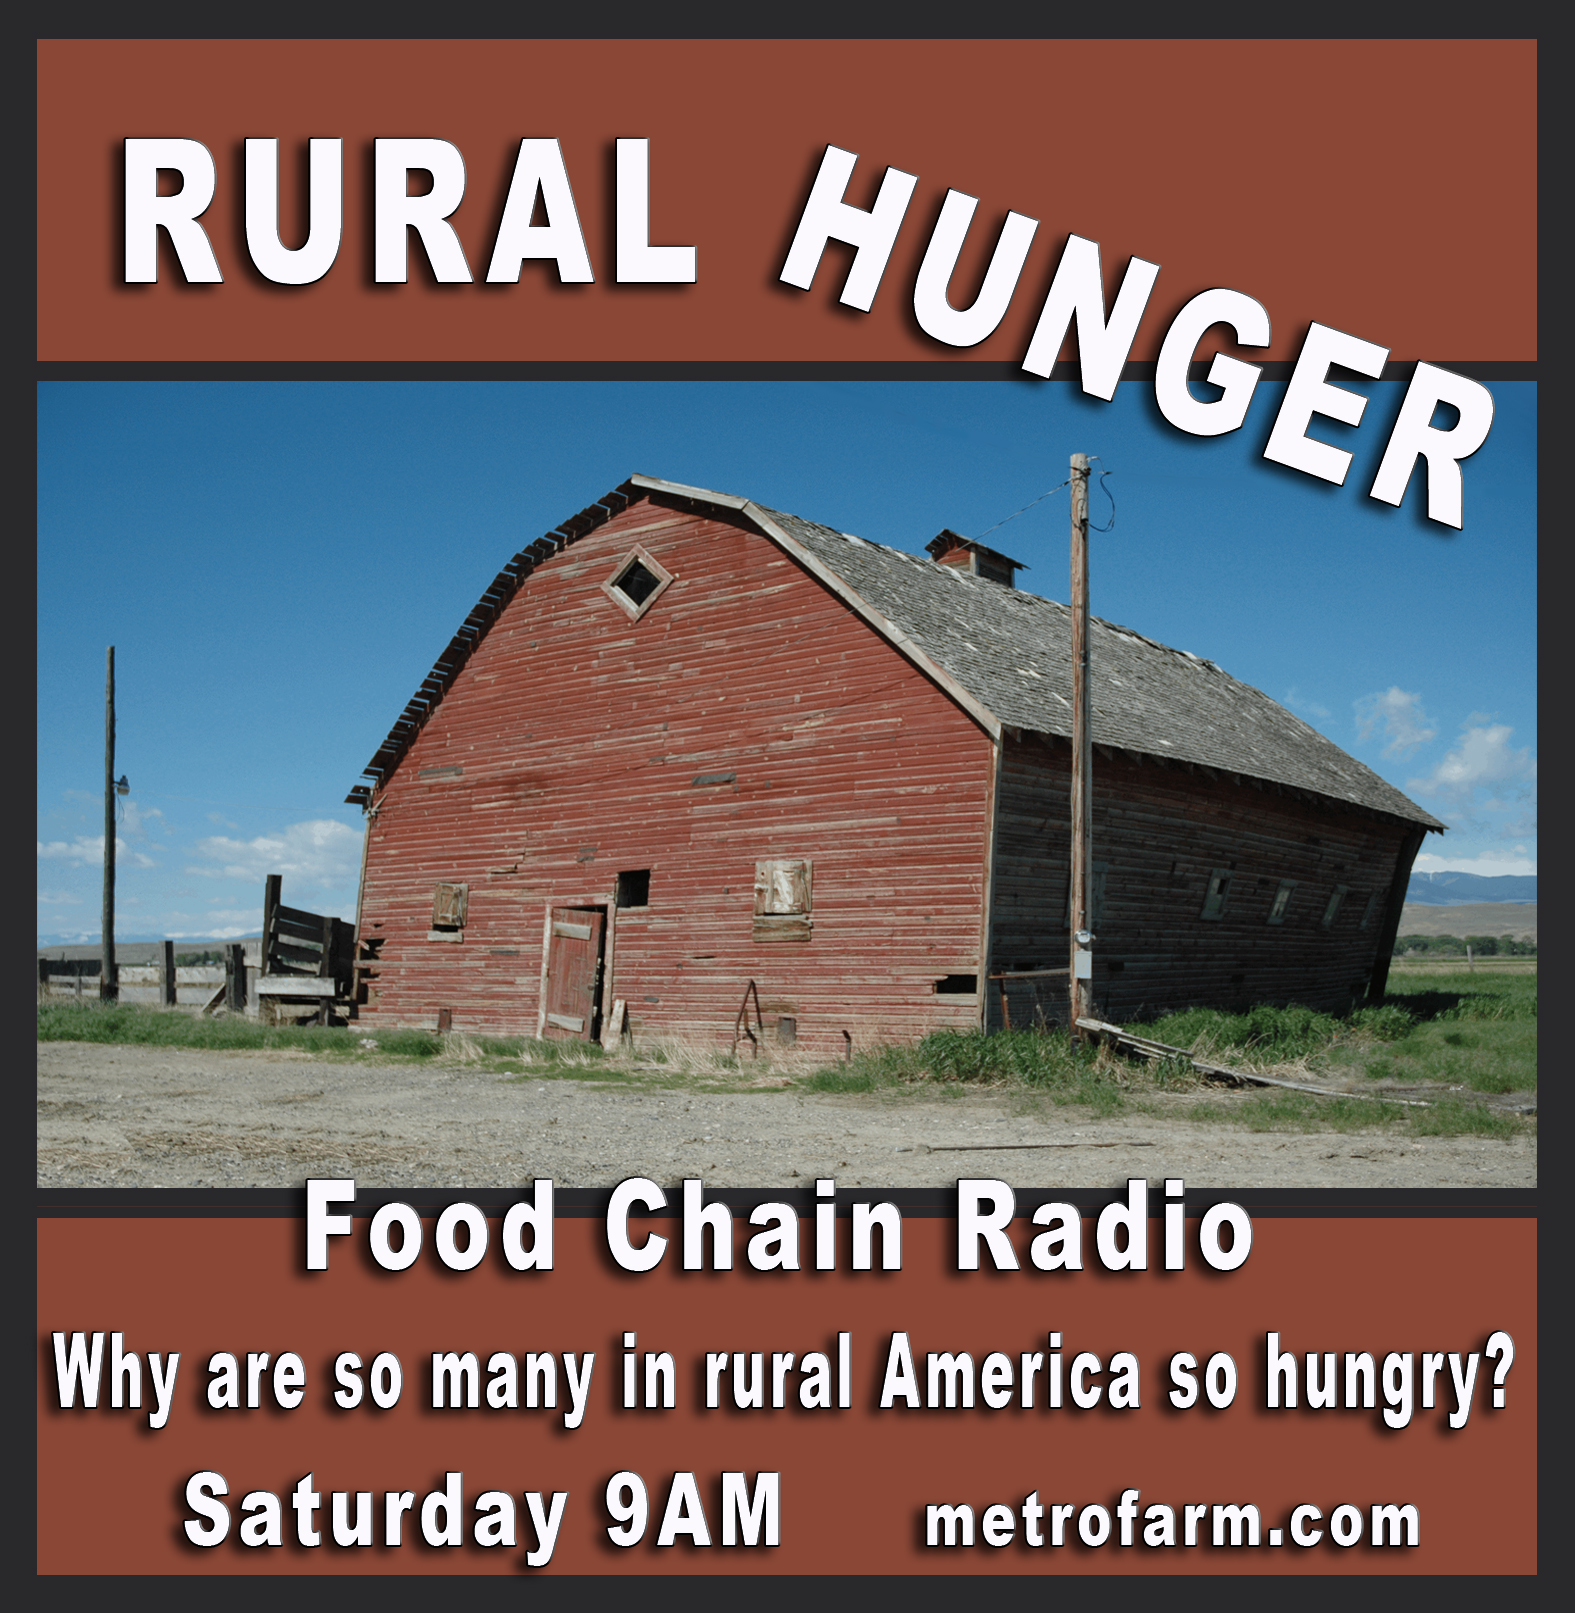 Michael Olson Food Chain Radio: WHY ARE SO MANY IN RURAL AMERICA SO HUNGRY?